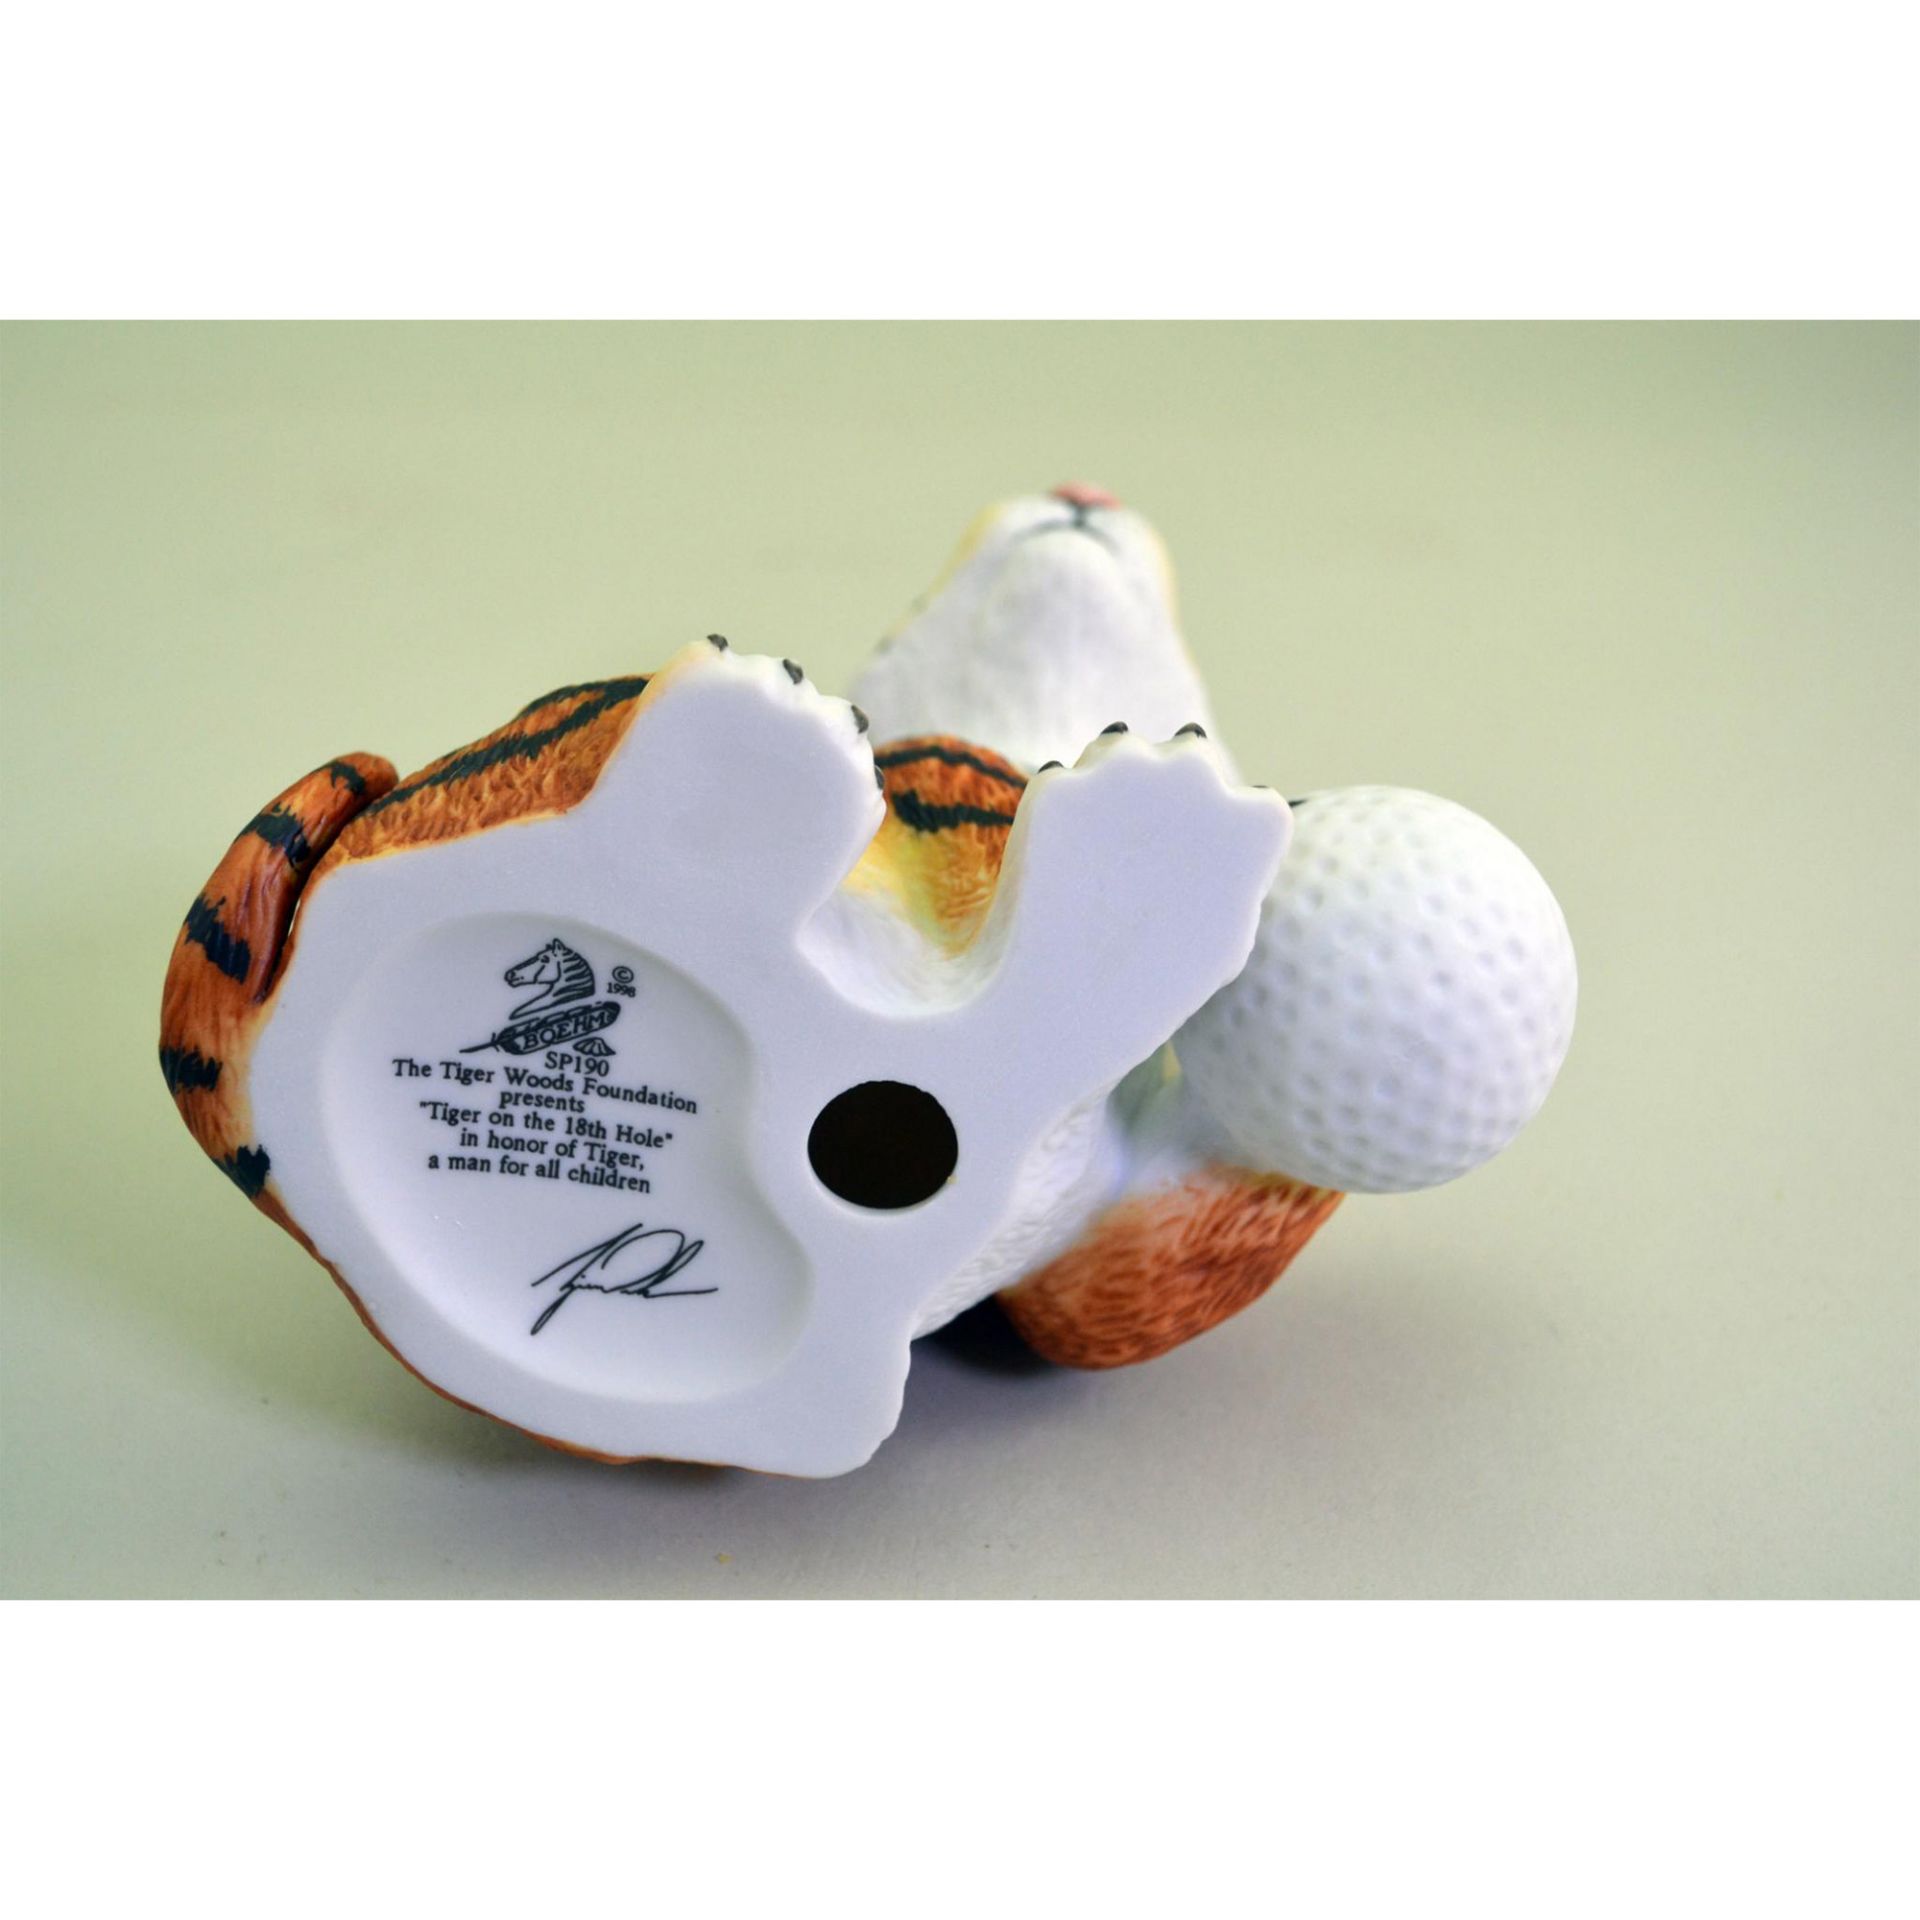 Boehm Porcelain Tiger Woods On The 18Th Hole Figurine - Image 4 of 5